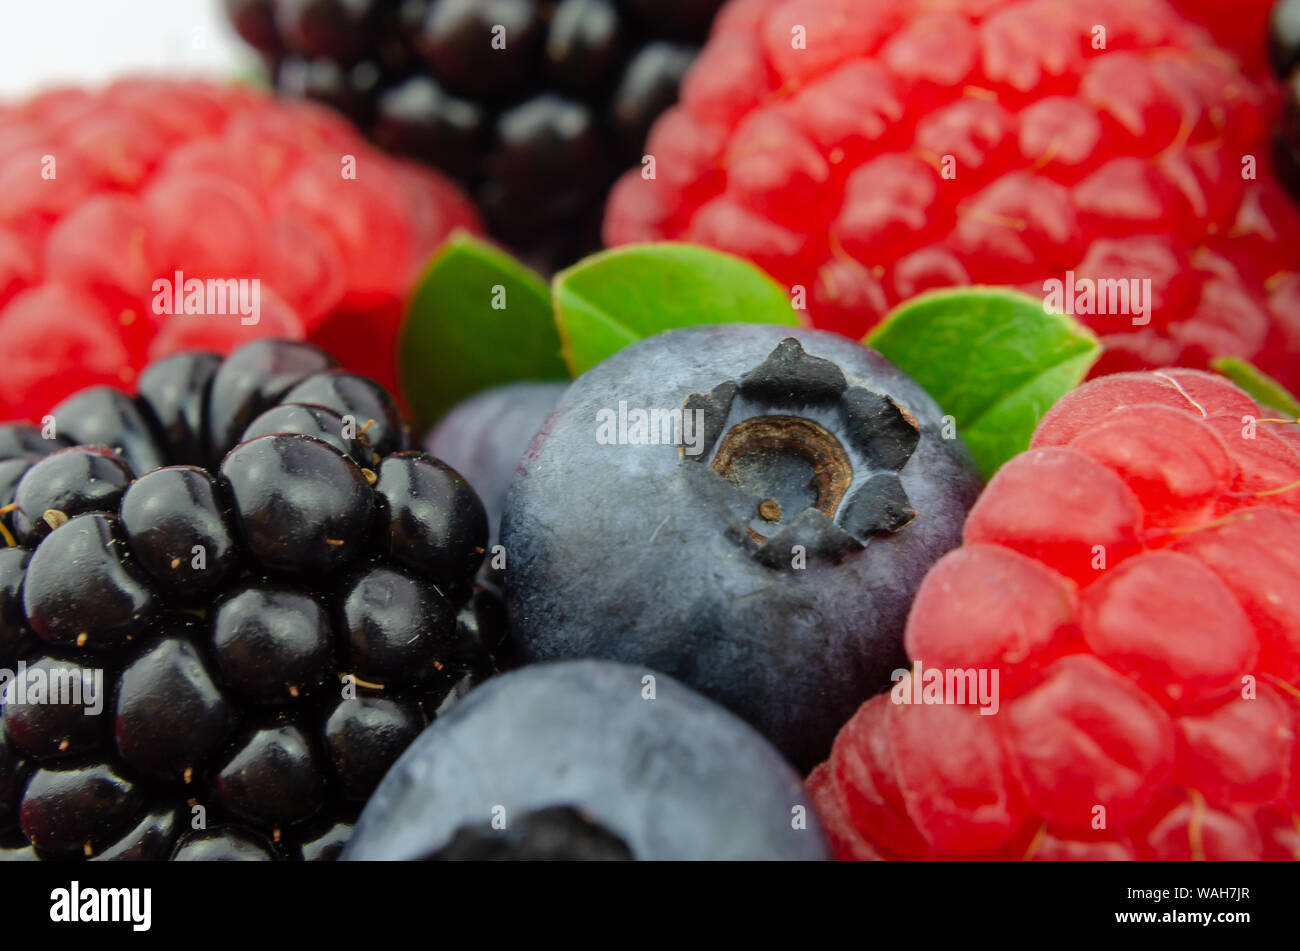 Mix of juicy berries Raspberry, Blueberry, Blackberry with tiny green leaves. Macro photo with the main focus on a blueberry. Stock Photo